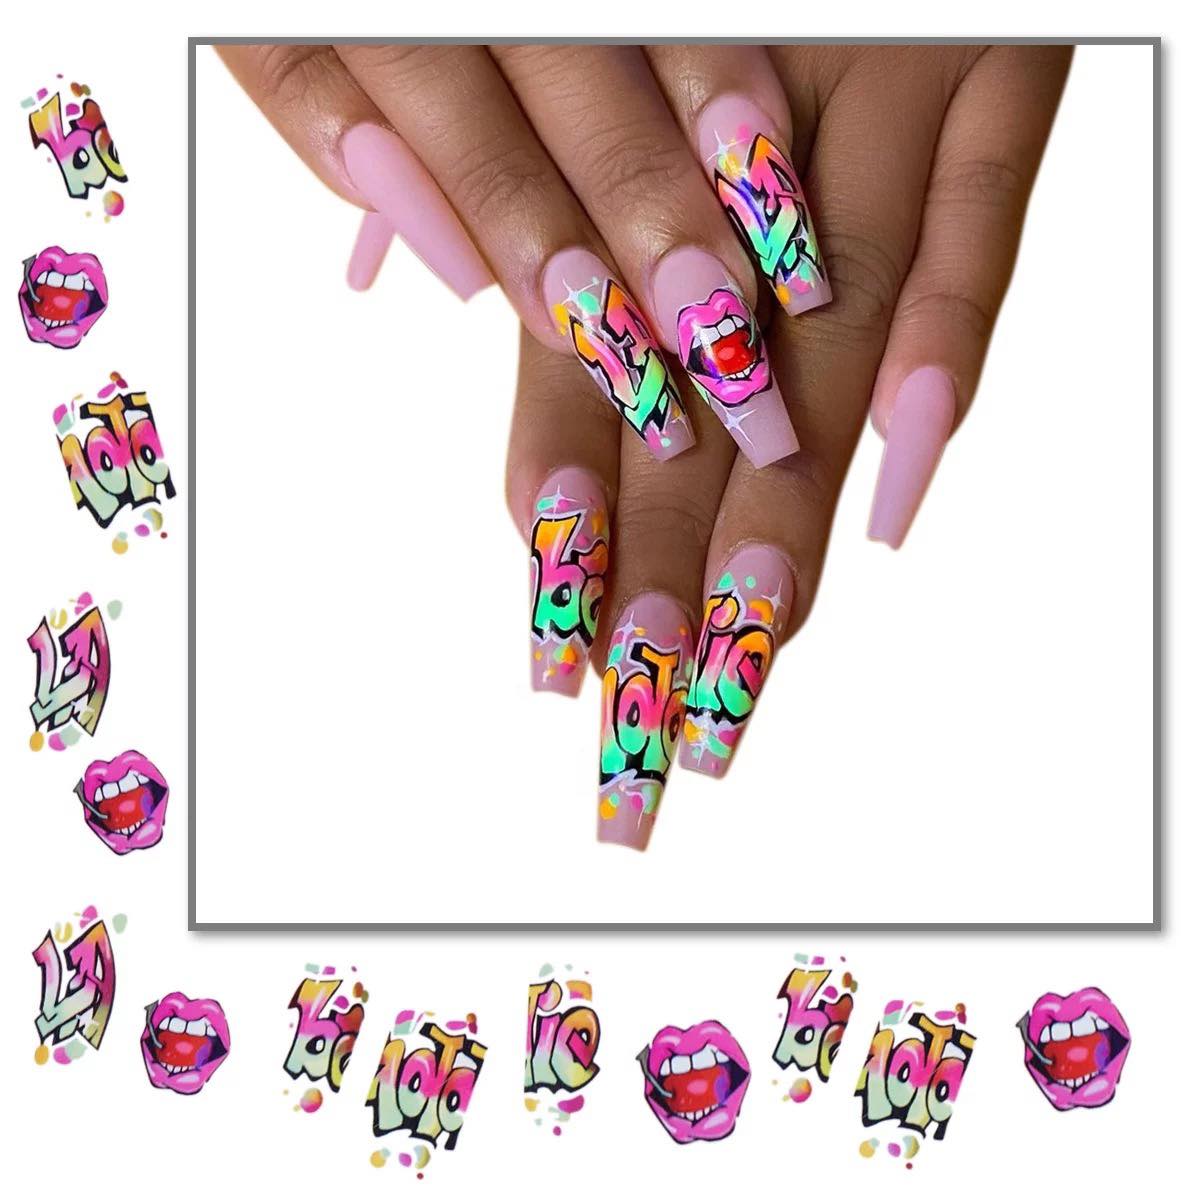 HOT GIRL NAIL DECALS ST107